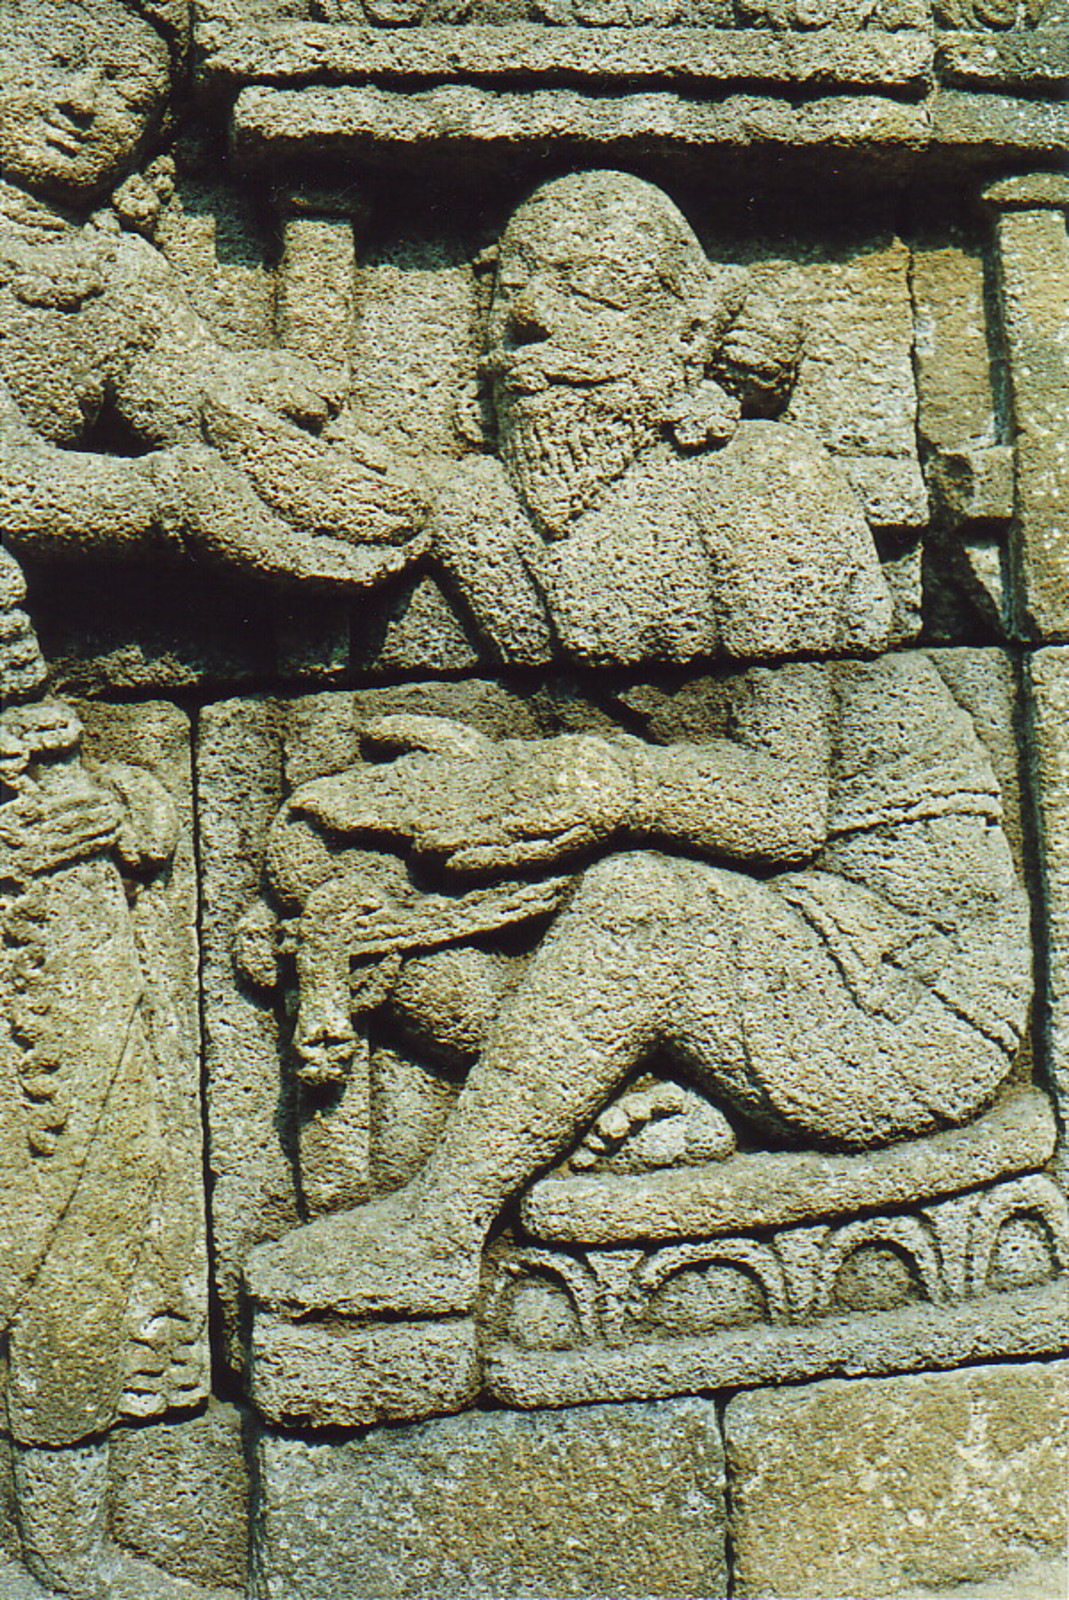 One of the many reliefs